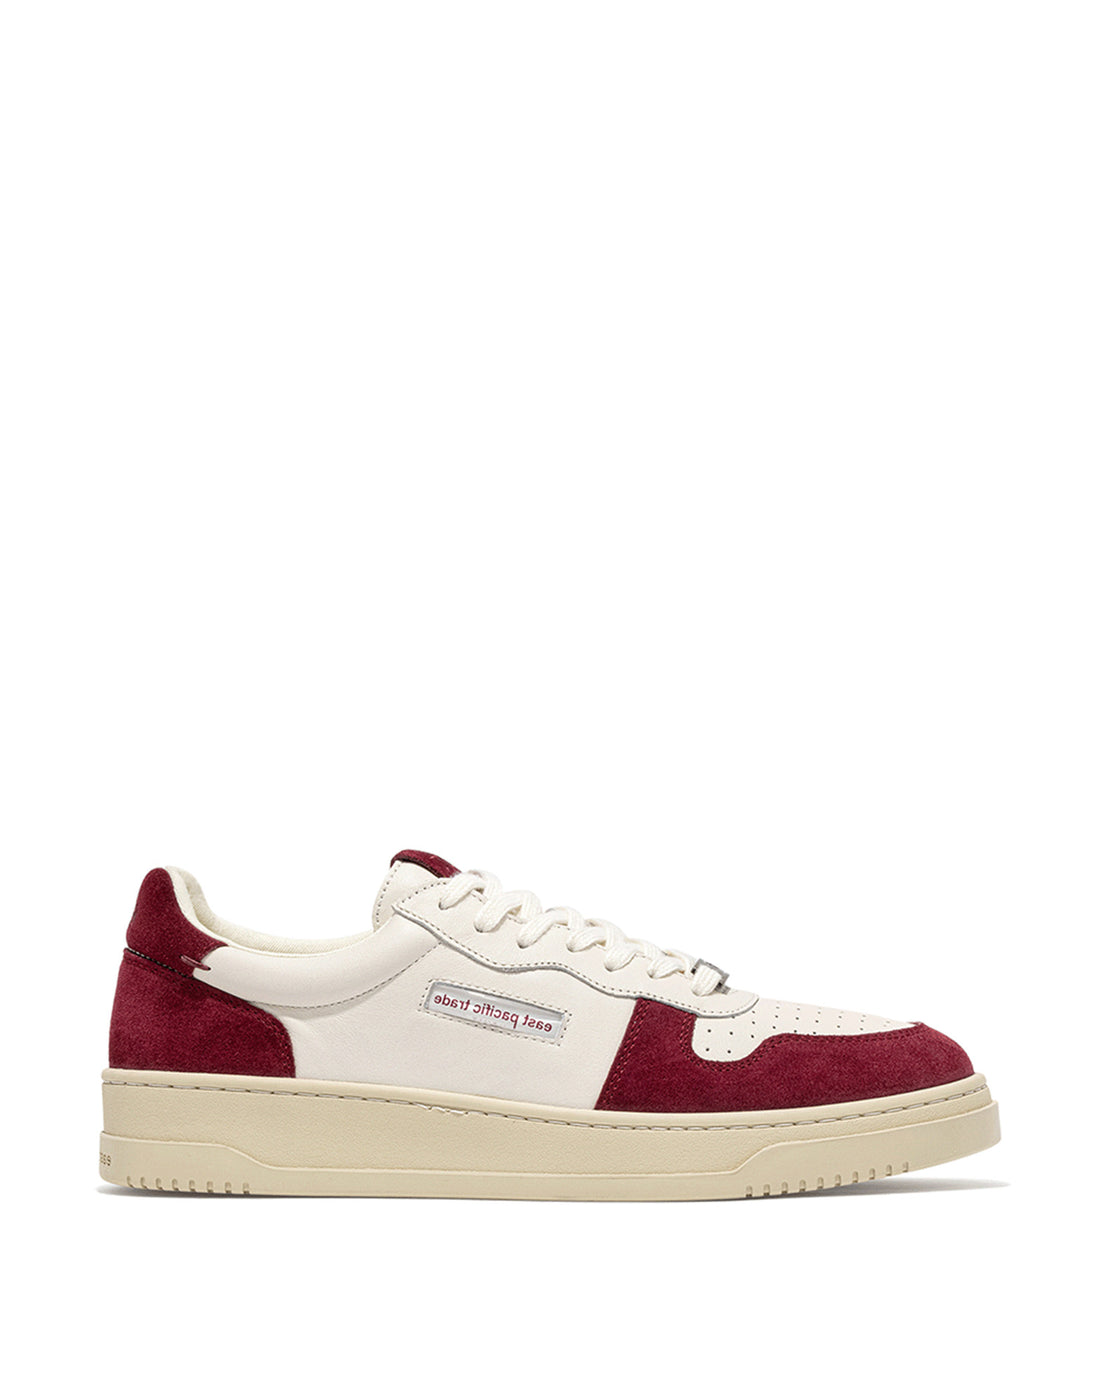 EPT Sneakers Court Suede Burgundy